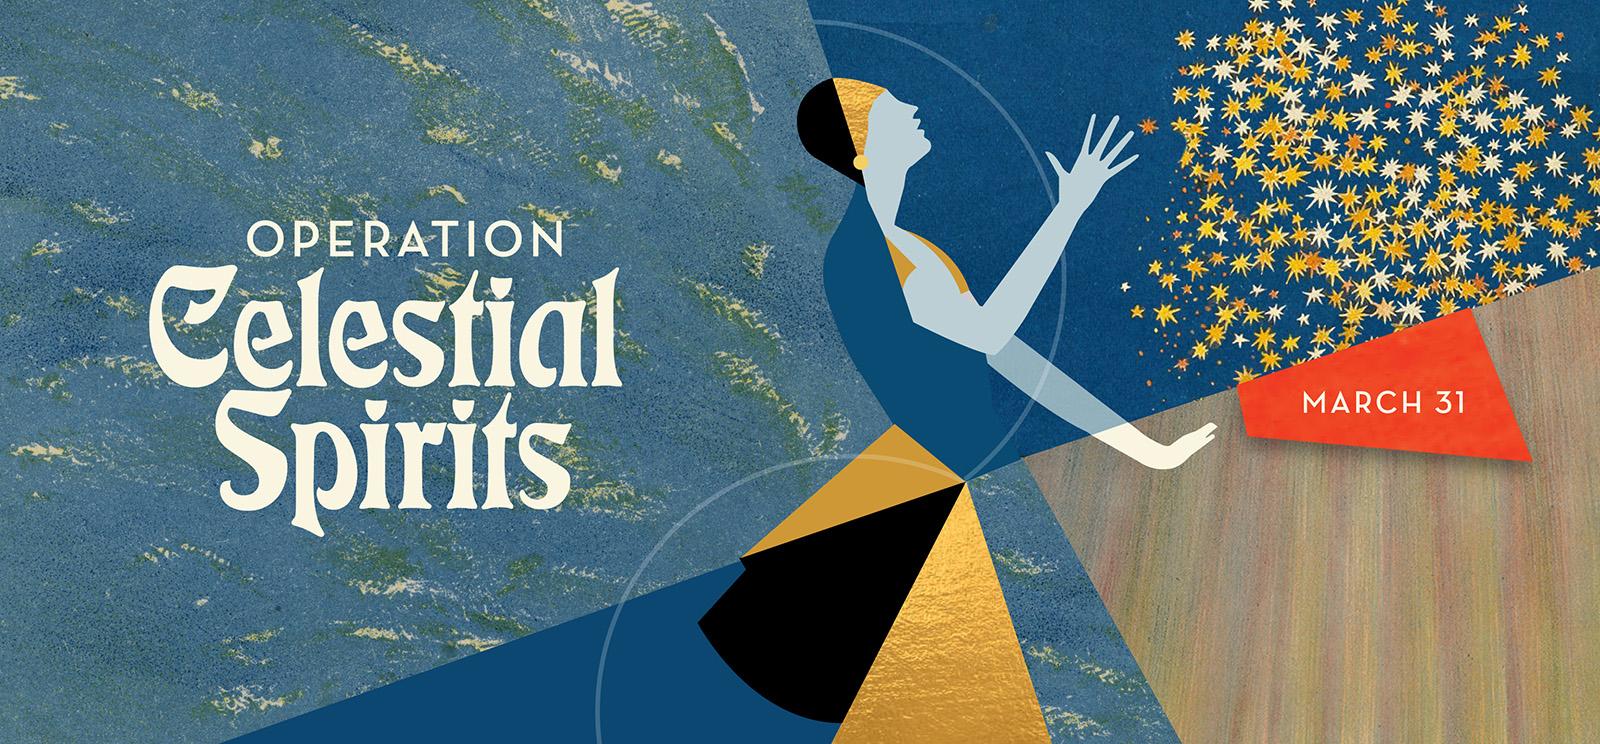 Image: Stylized silhouette of a female figure wearing a headwrap and dress, gazing upwards and gesturing at a mass of golden sparkles drifting up. Text: Operation Celestial Spirits / March 31